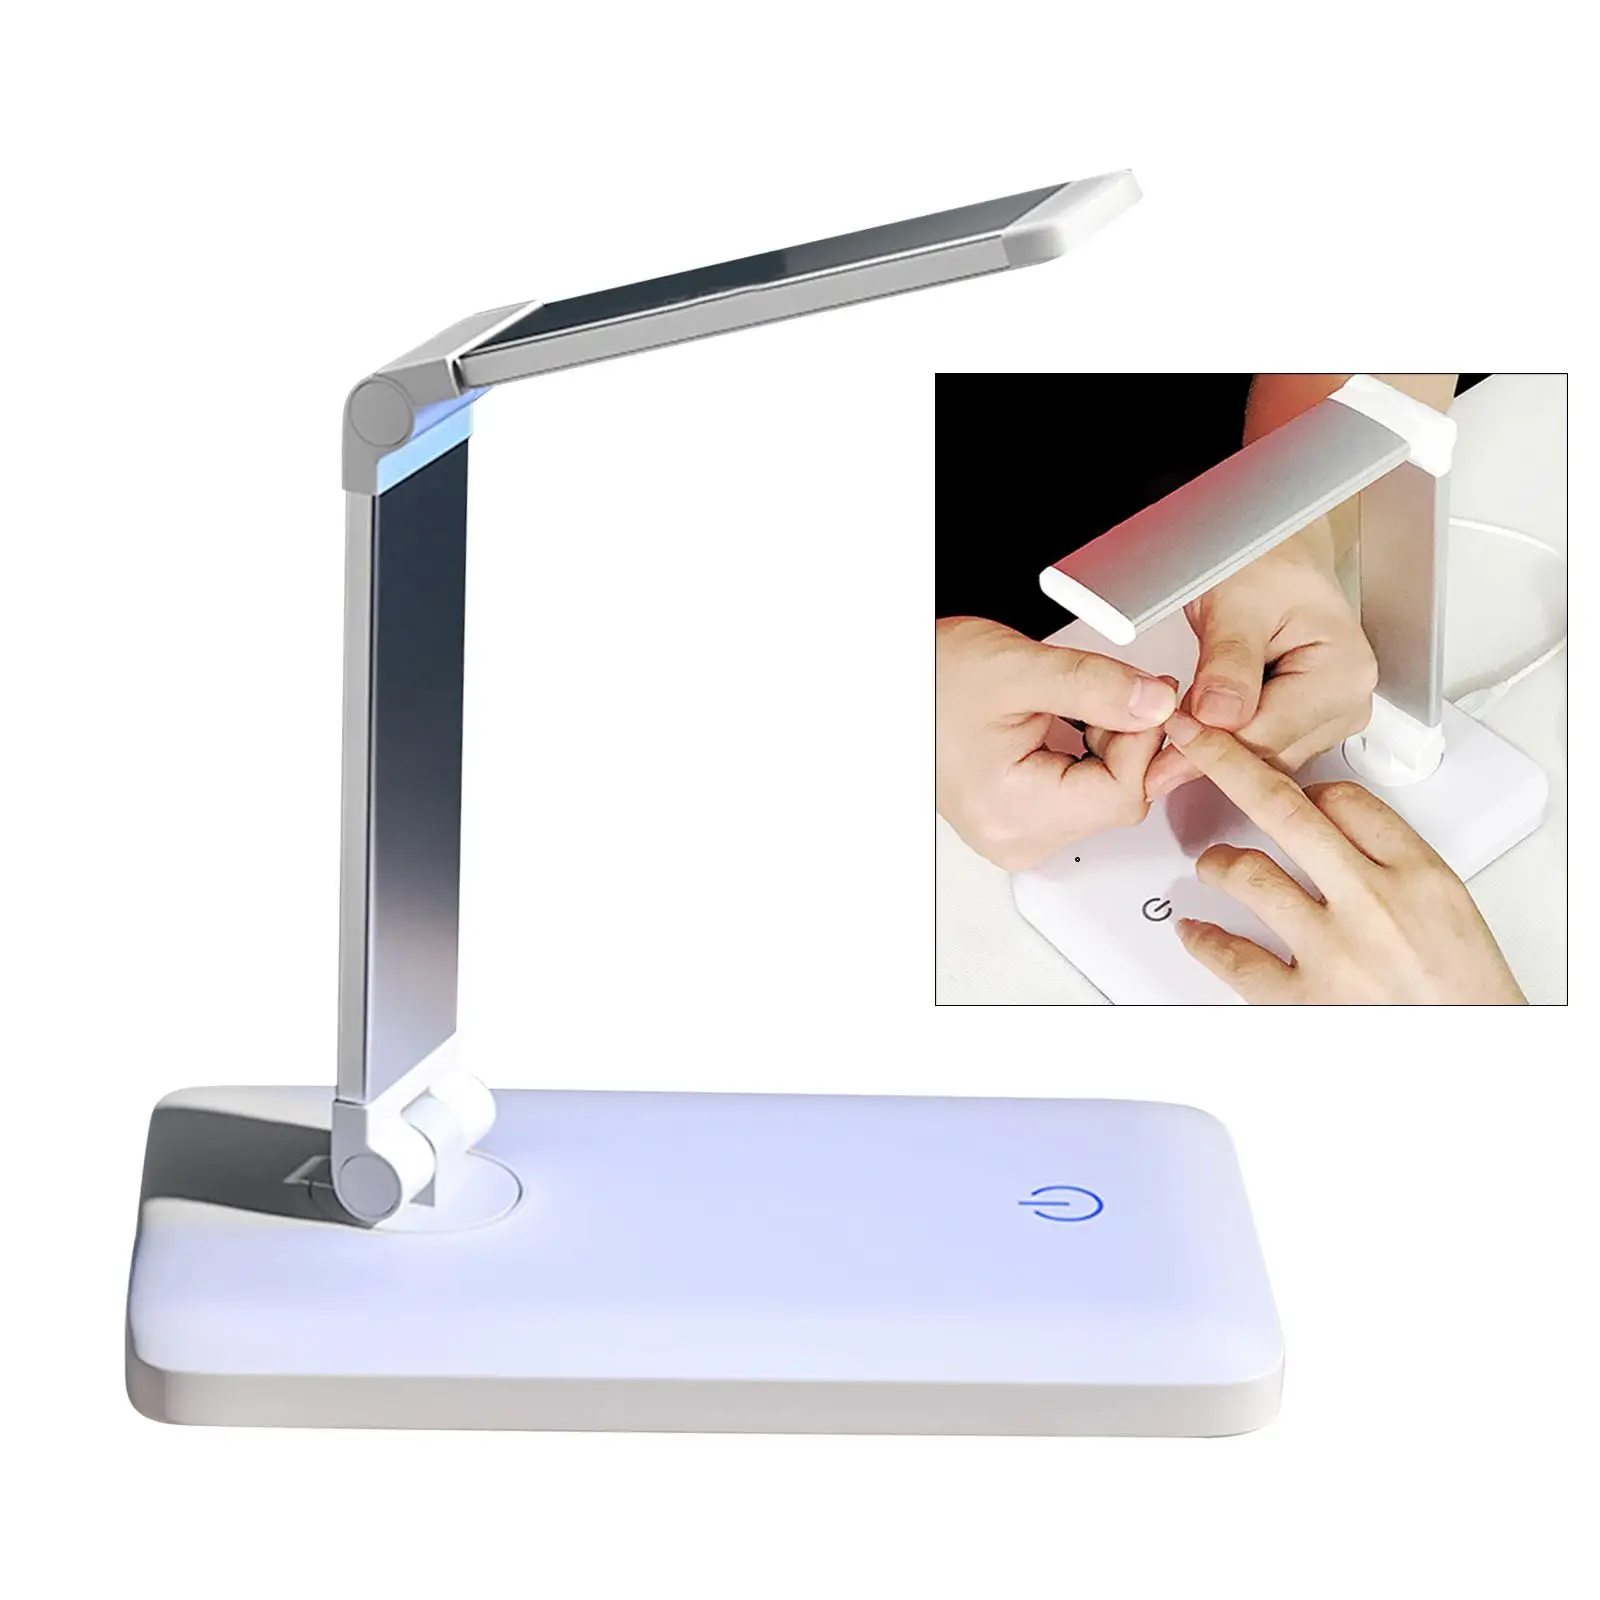 LED Nail Lamp Portable Professional 10 LED Rechargeable Beauty Accessories Parts 12W Tools Nail Dryer  Light for Travel  